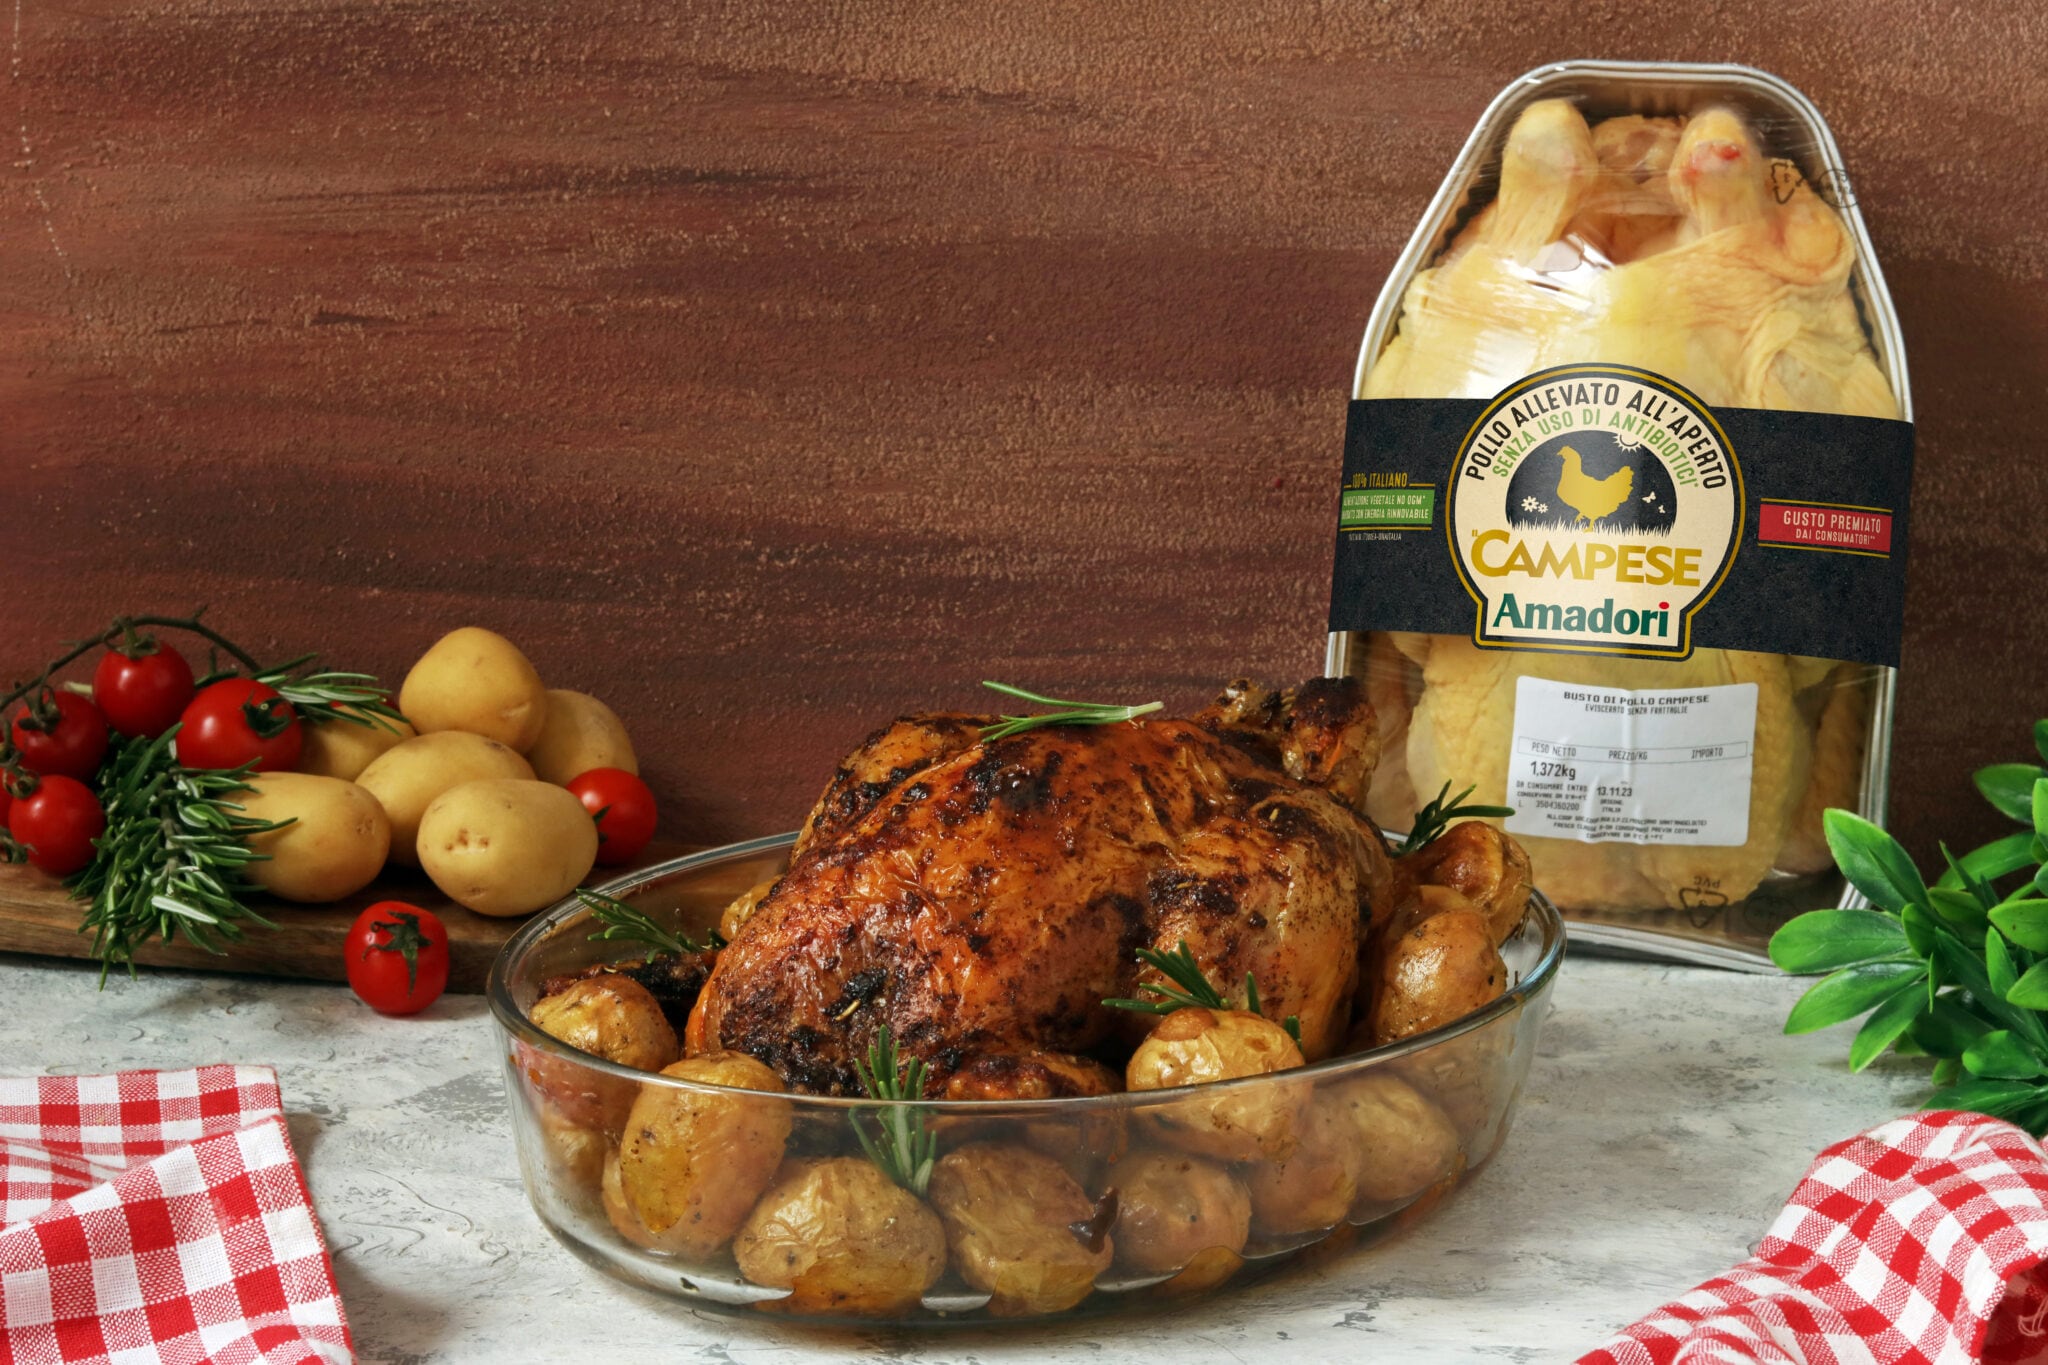 Roasted Campese chicken with smoked paprika